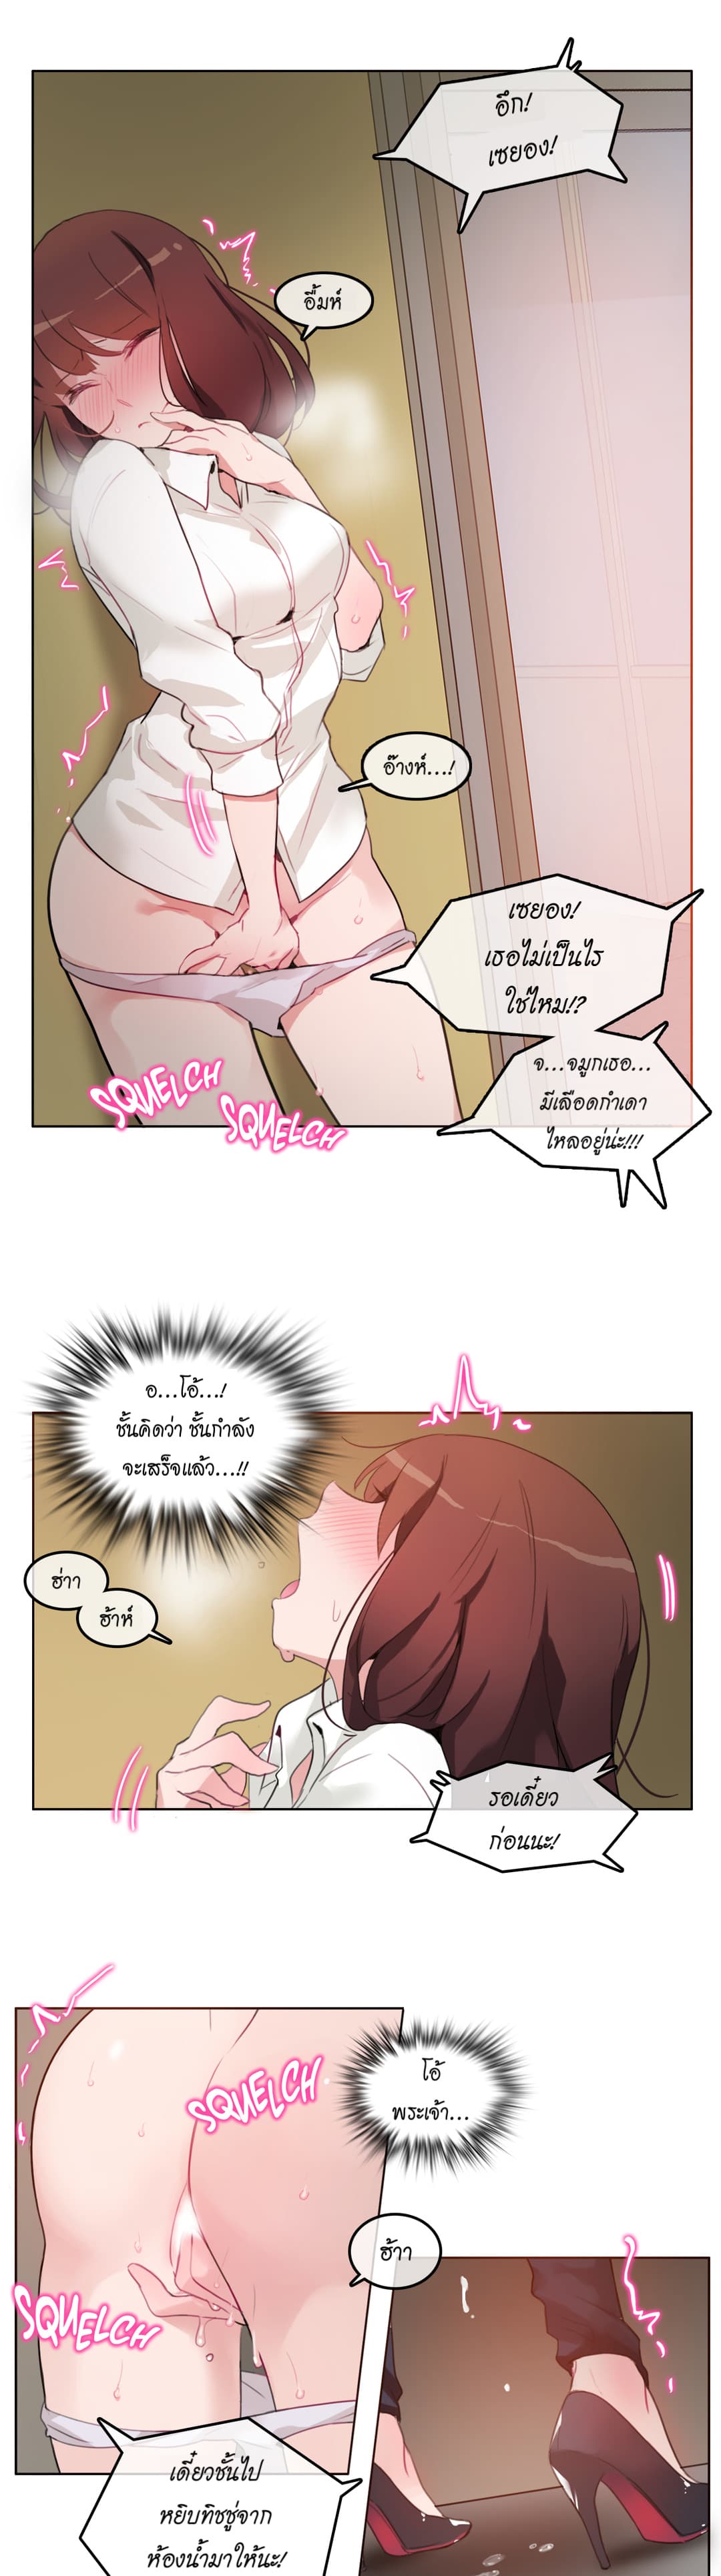 A Pervert’s Daily Life 25 (19)